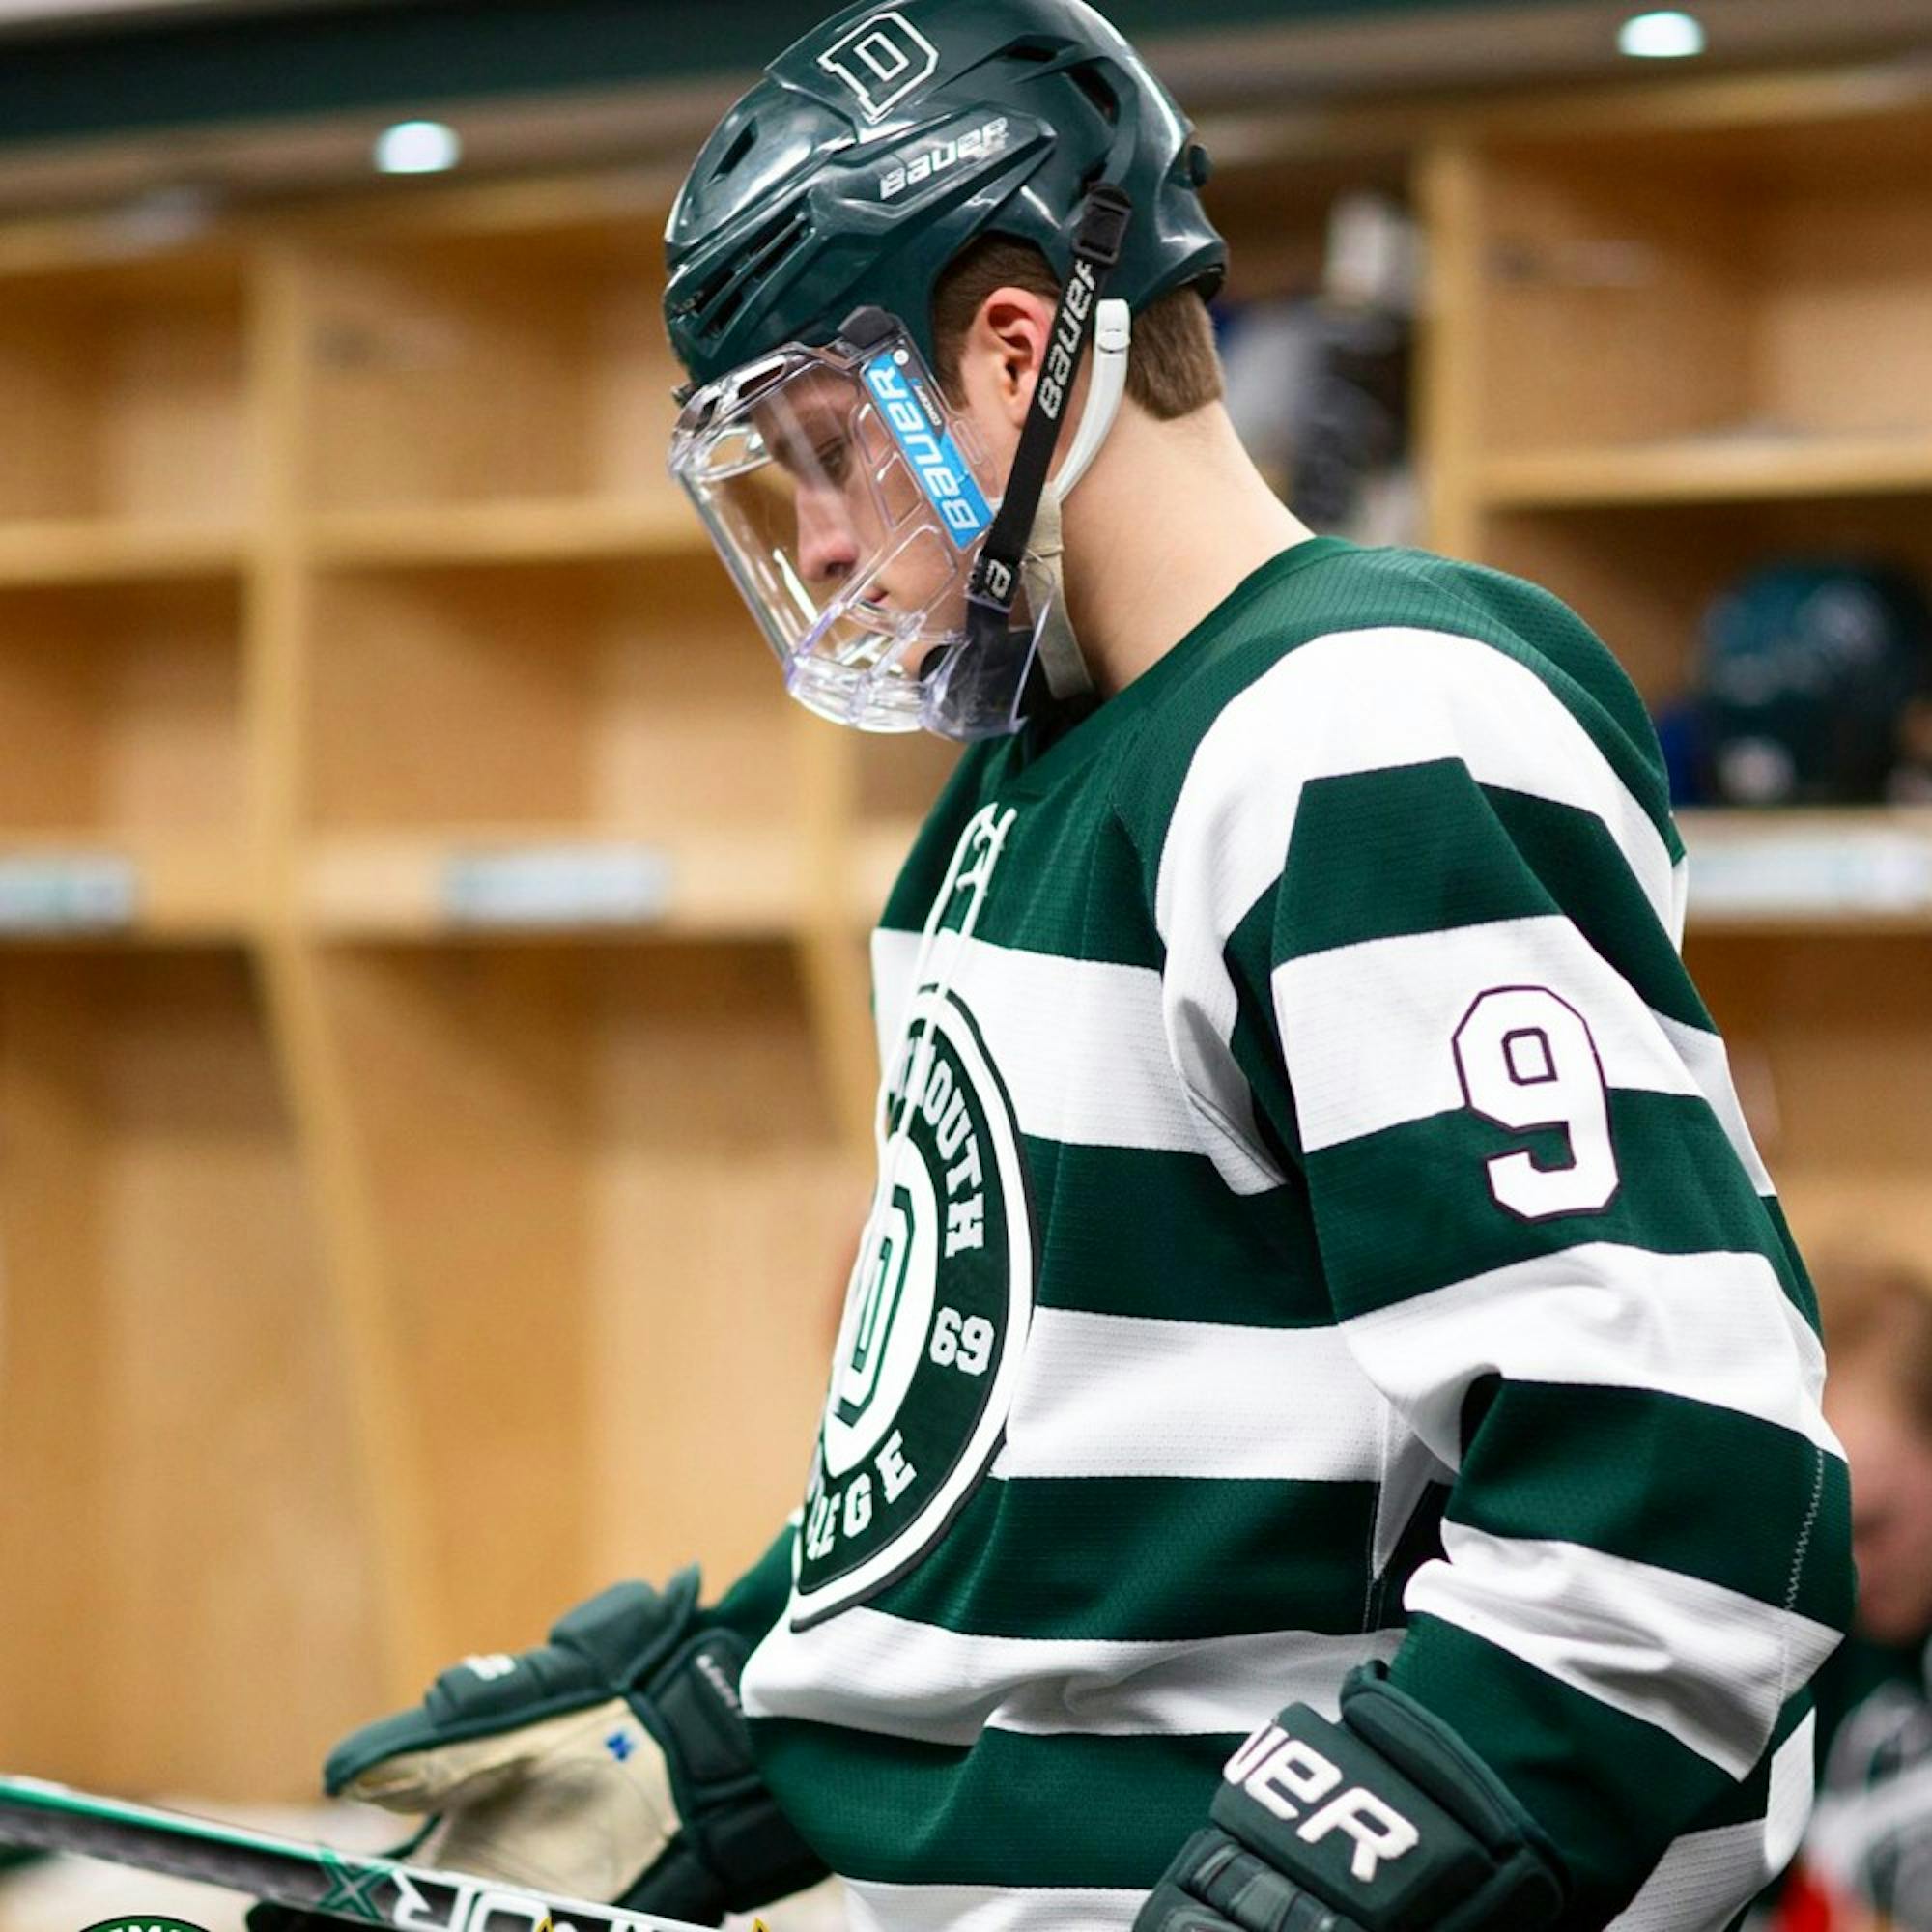 Troy Crema '17 wrapped up his Dartmouth career with 27 goals and 59 points, as well as several All-Ivy honors.